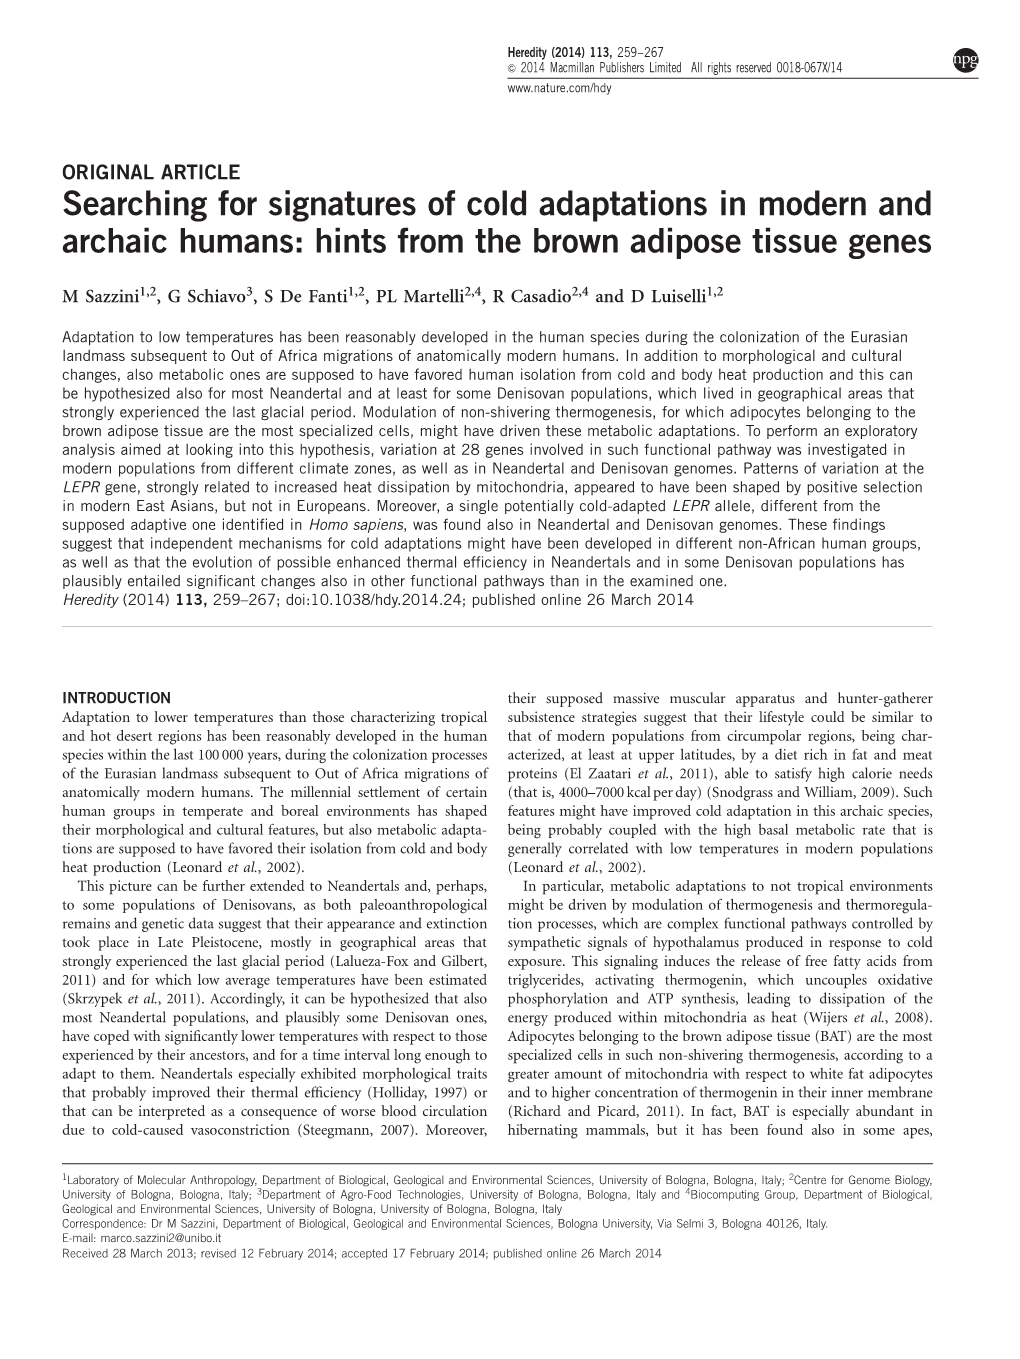 Searching for Signatures of Cold Adaptations in Modern and Archaic Humans: Hints from the Brown Adipose Tissue Genes